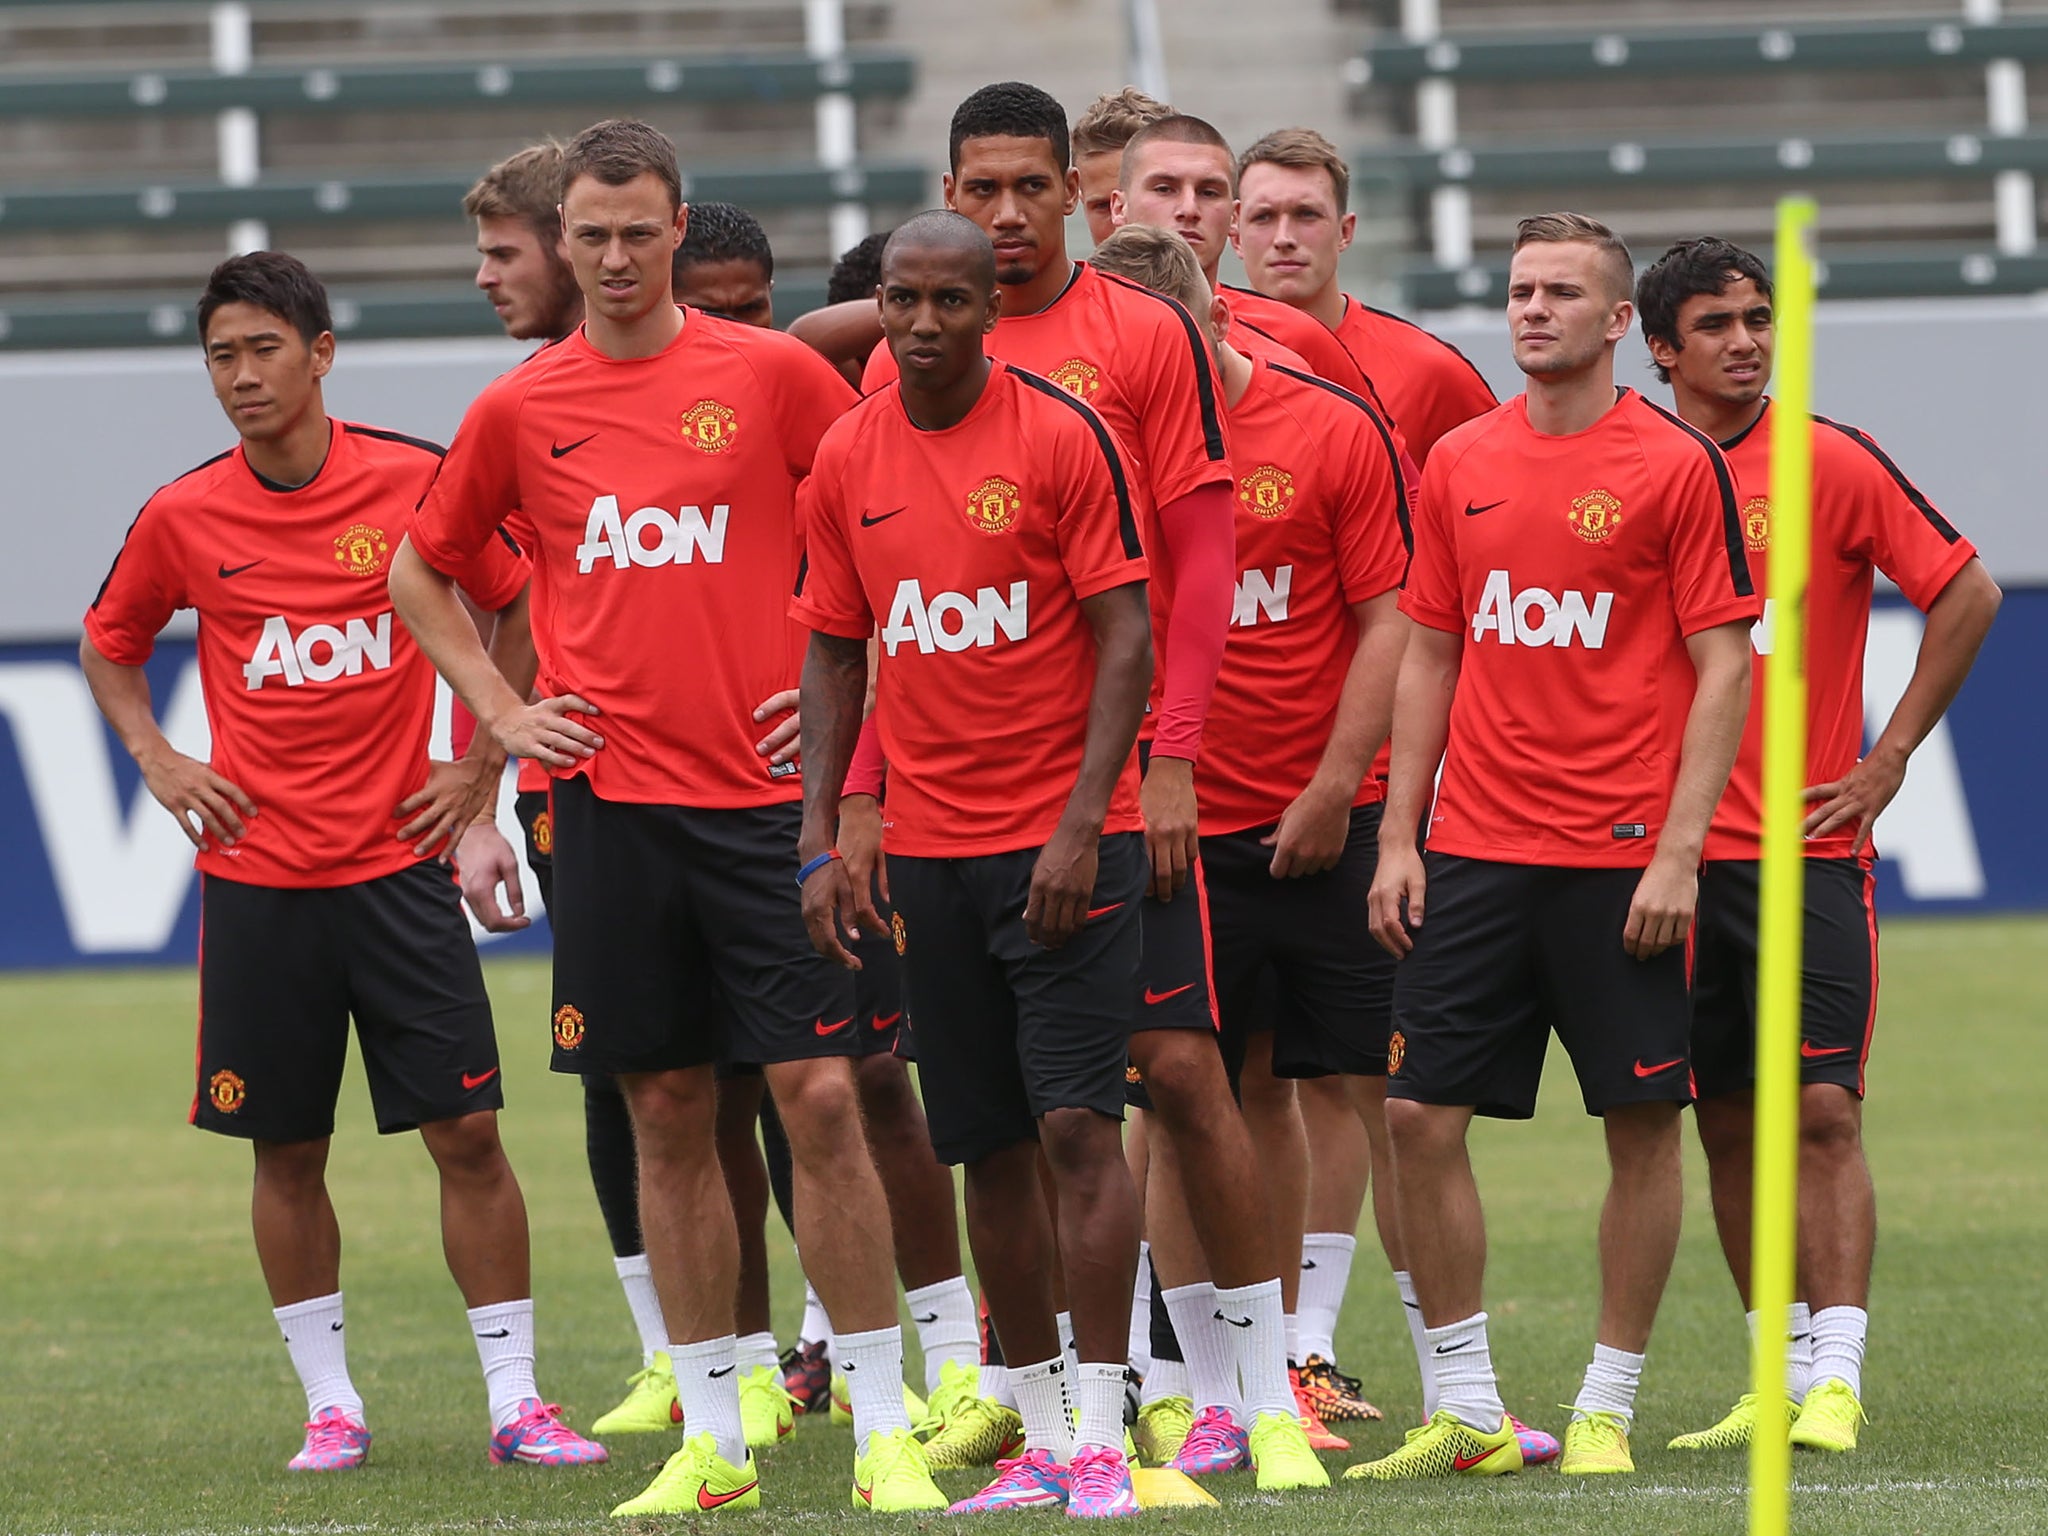 Shinji Kagawa, Jonny Evans, Ashley Young, Chris Smalling and Luke Shaw of Manchester United in action during a training session